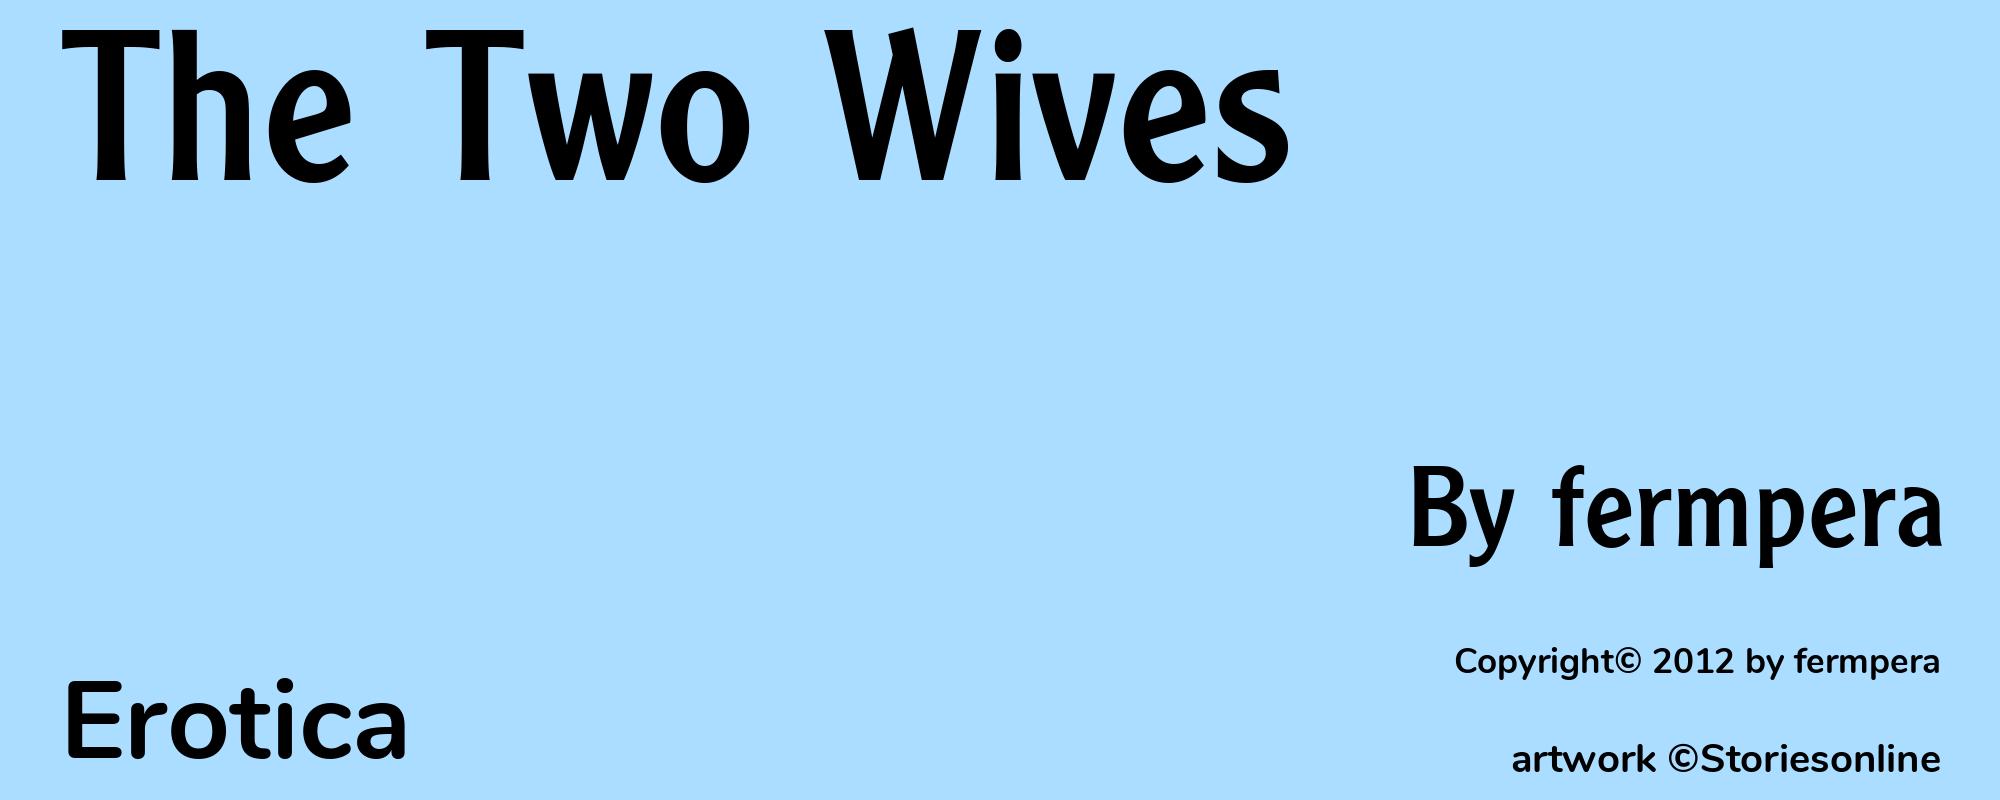 The Two Wives - Cover